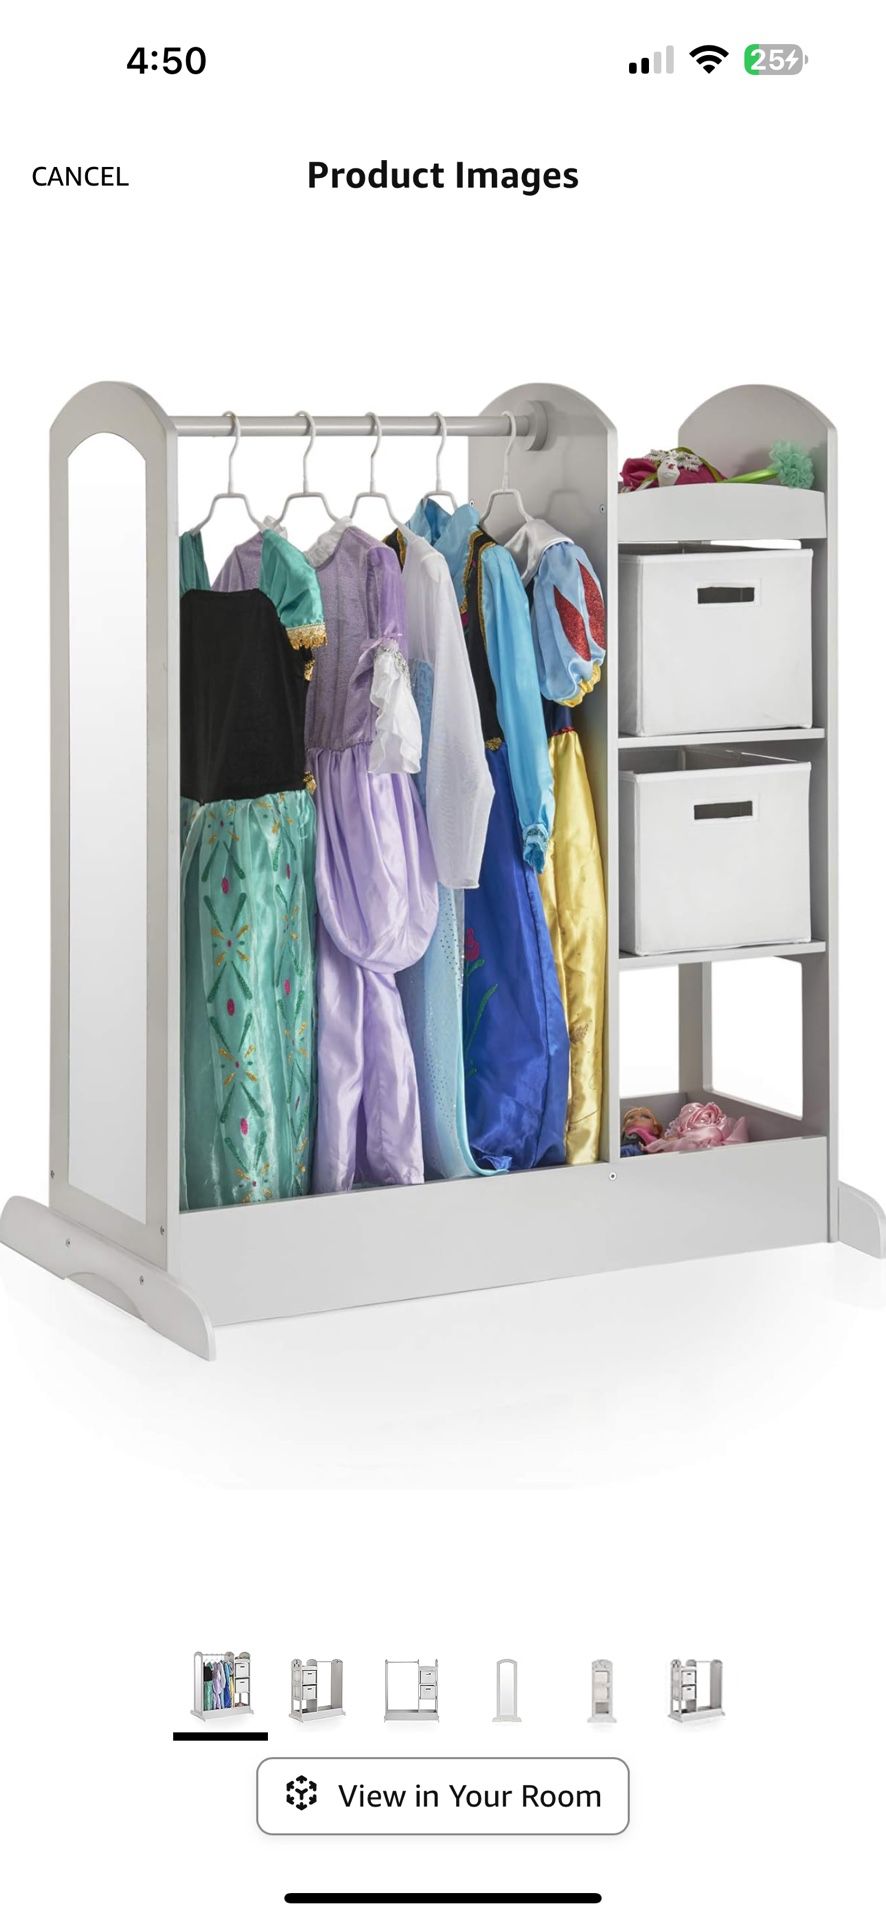 Guidecraft See and Store Dress-up Center – Gray: Kids Dramatic Play Storage Armoire with Mirror, Rack, Shelves & Bottom Tray - Toddlers Costume & Toy 